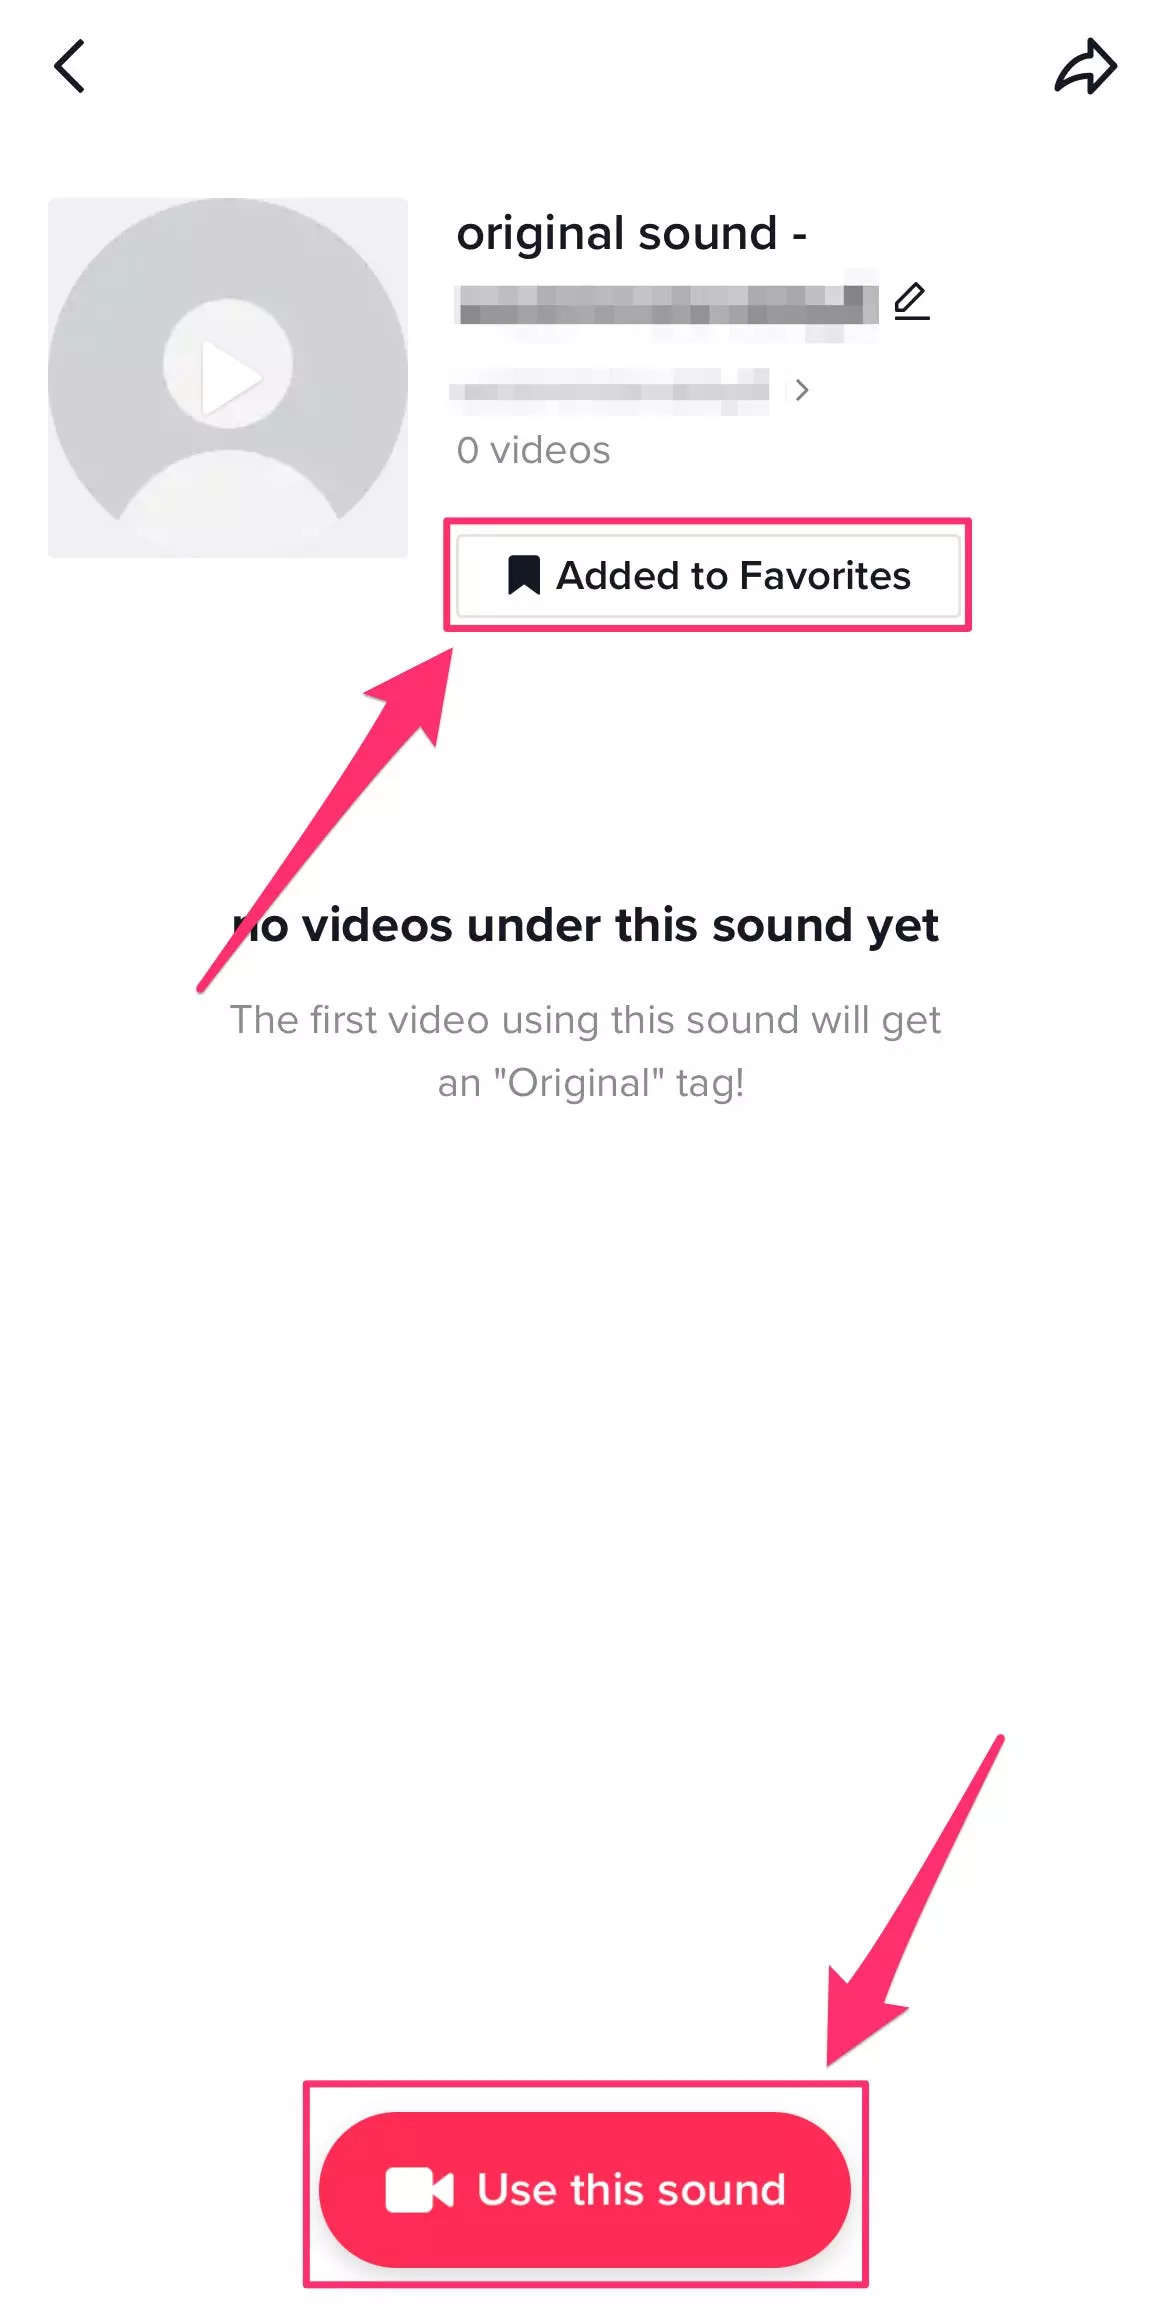 How to create your own voice on TikTok, or how to add music and voiceovers to your videos